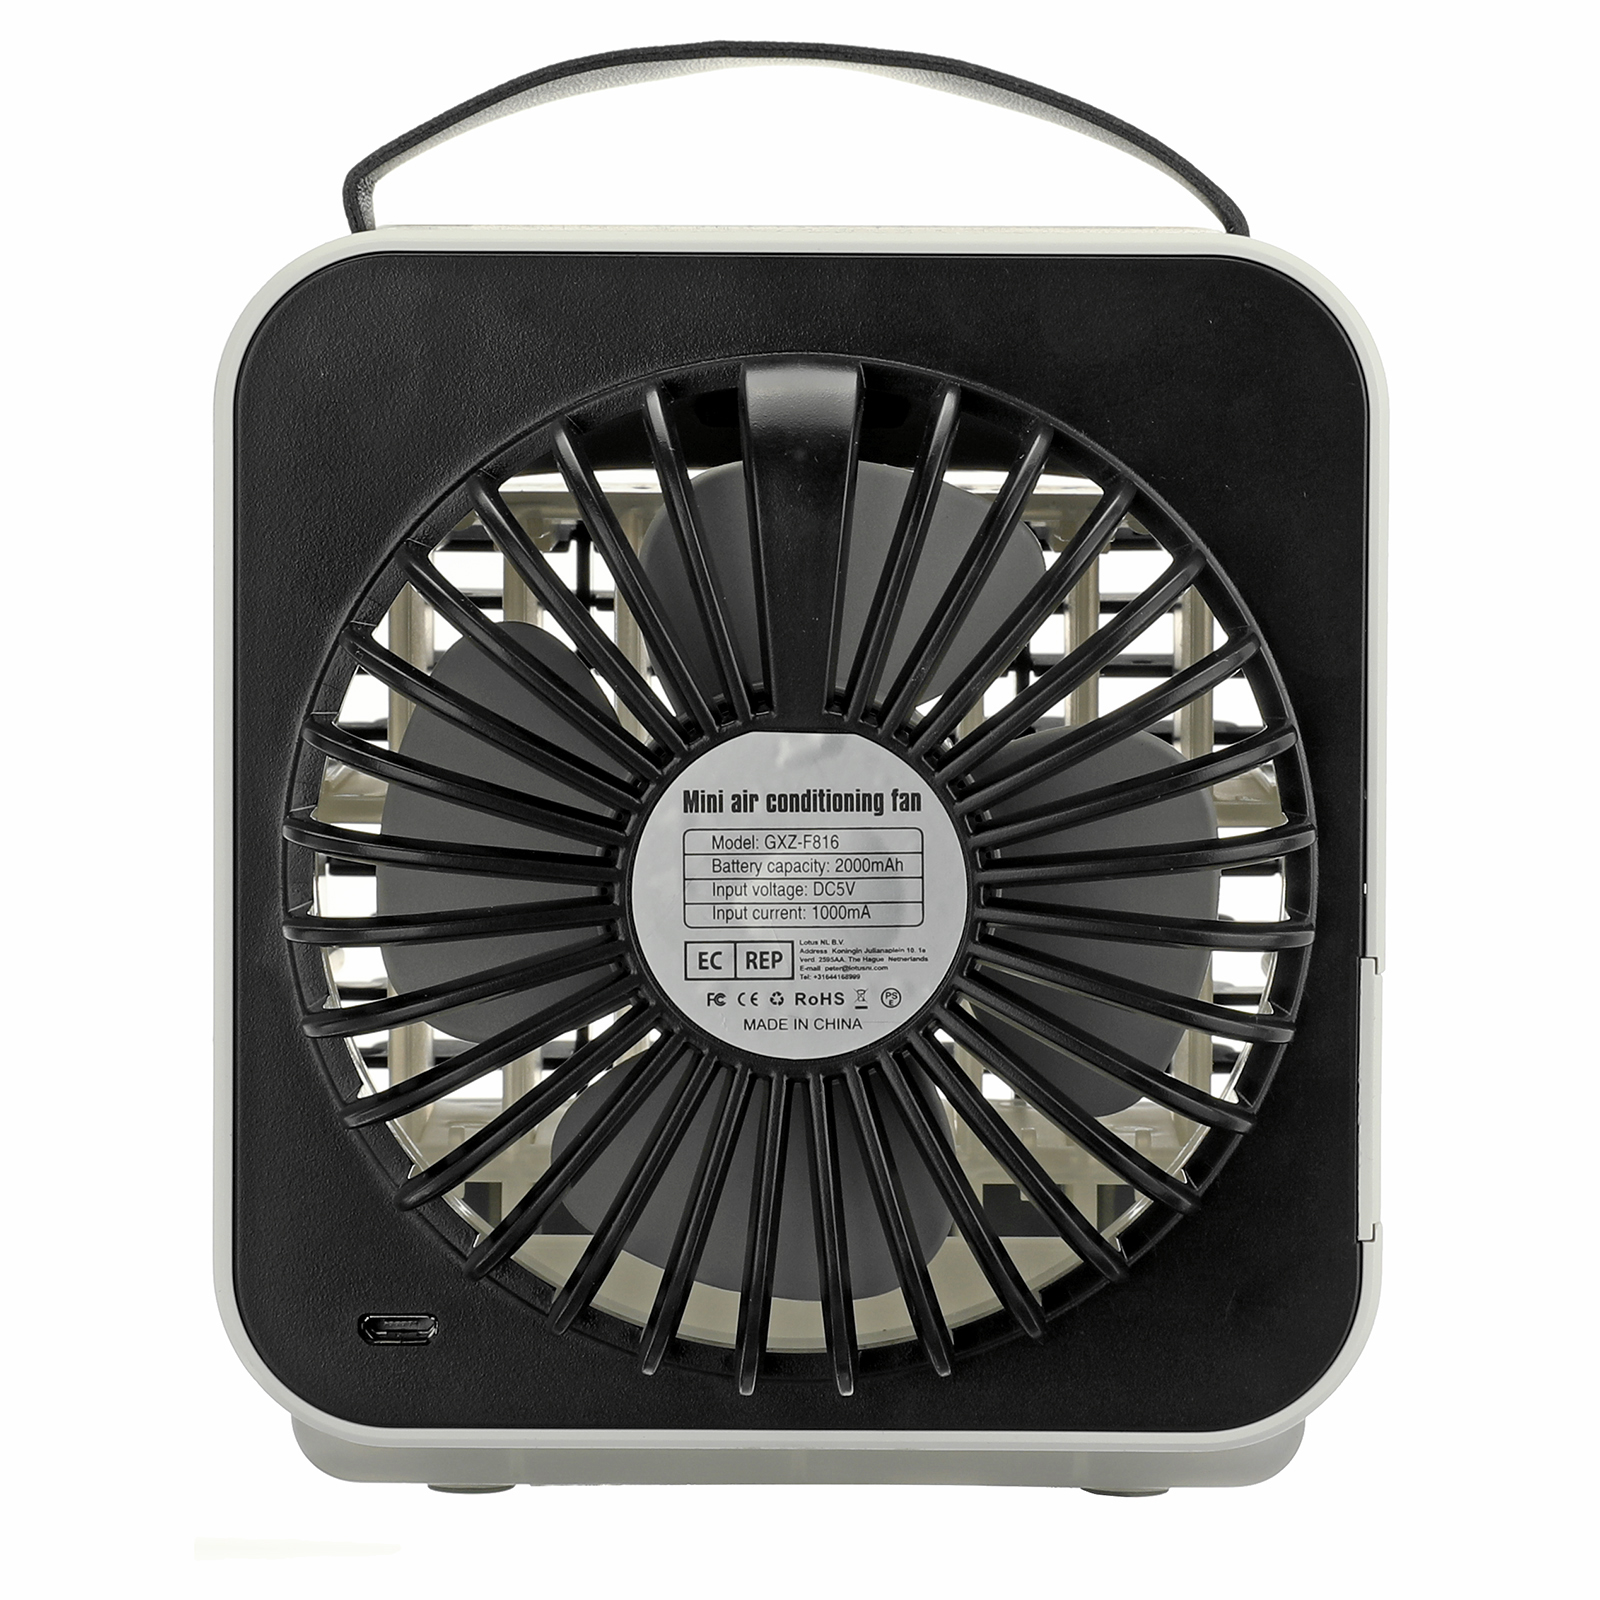 4-in-1-Mini-Air-Cooler-Portable-USB-Air-Conditioning-2000mAh-Cooling-Fan-3-Wind-Speed-Adjustment-Nig-1885394-11